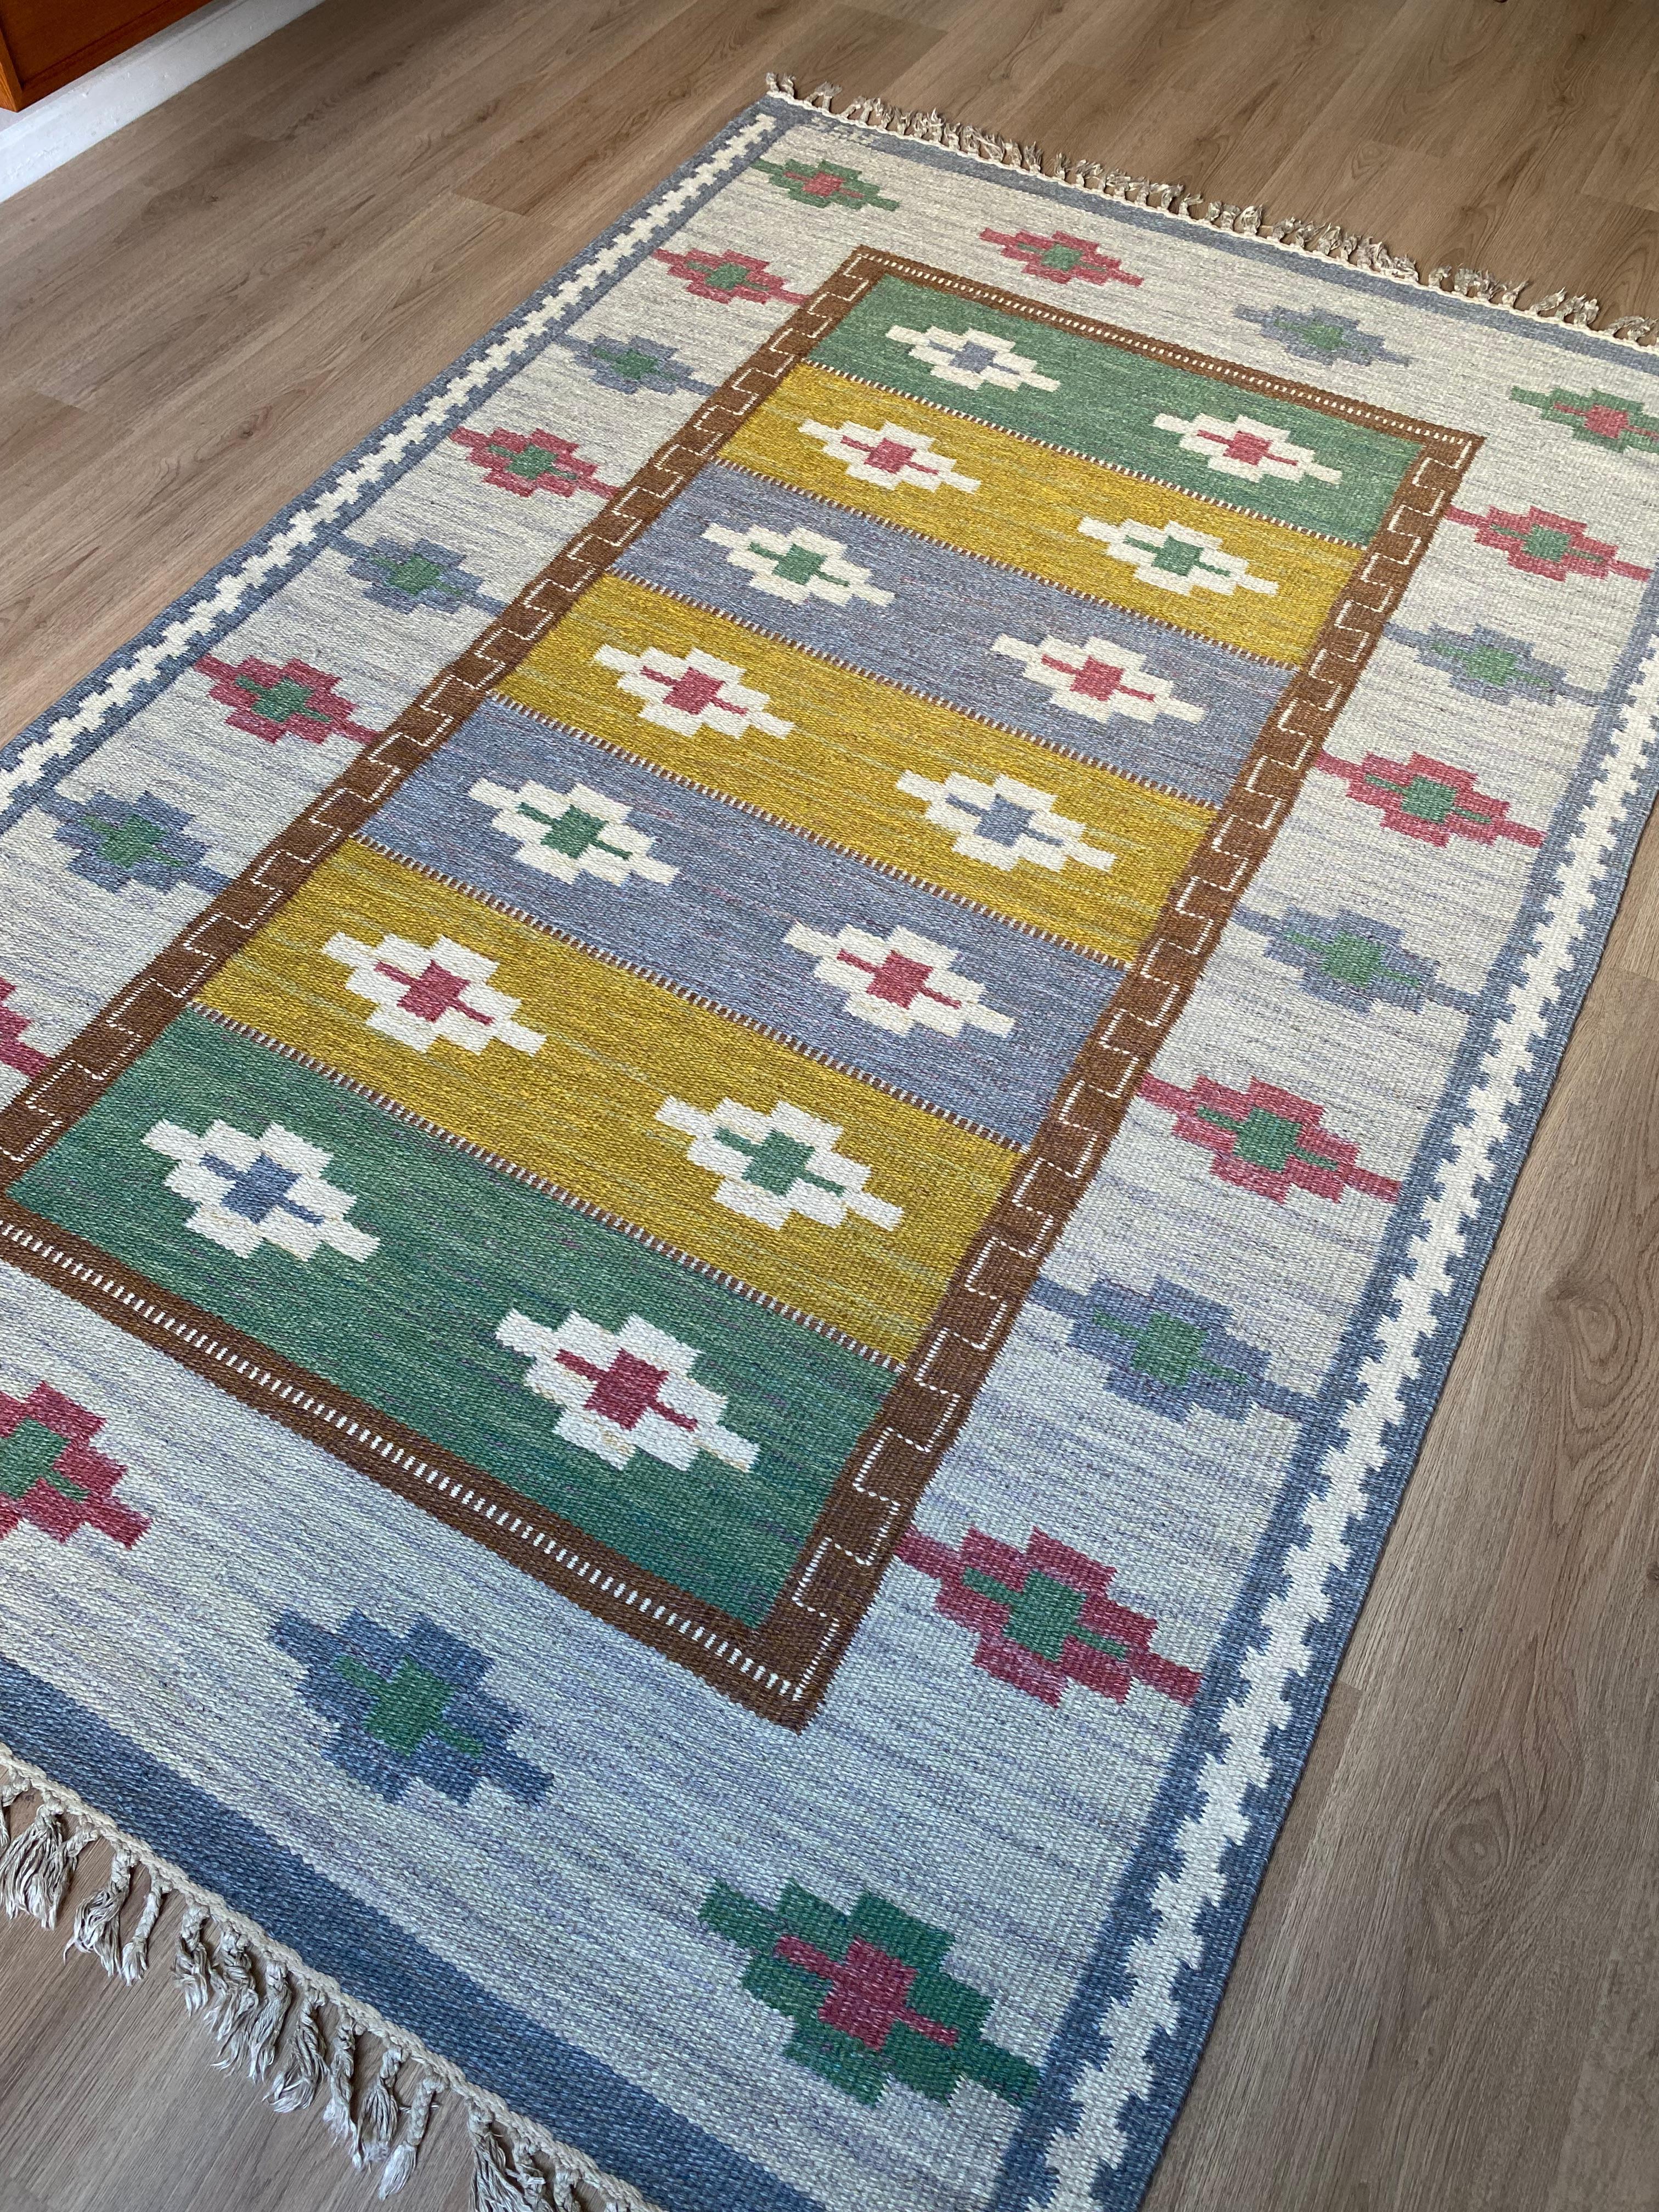 Handwoven rug in kelim technique by Swedish textile artist Anna-Greta Sjöqvist. She was born in 1908 and died in 1993, she had her own weaving mill in Sösdala in Hässleholm.

Röllakanmatta is a traditional type of carpet, with a long history in